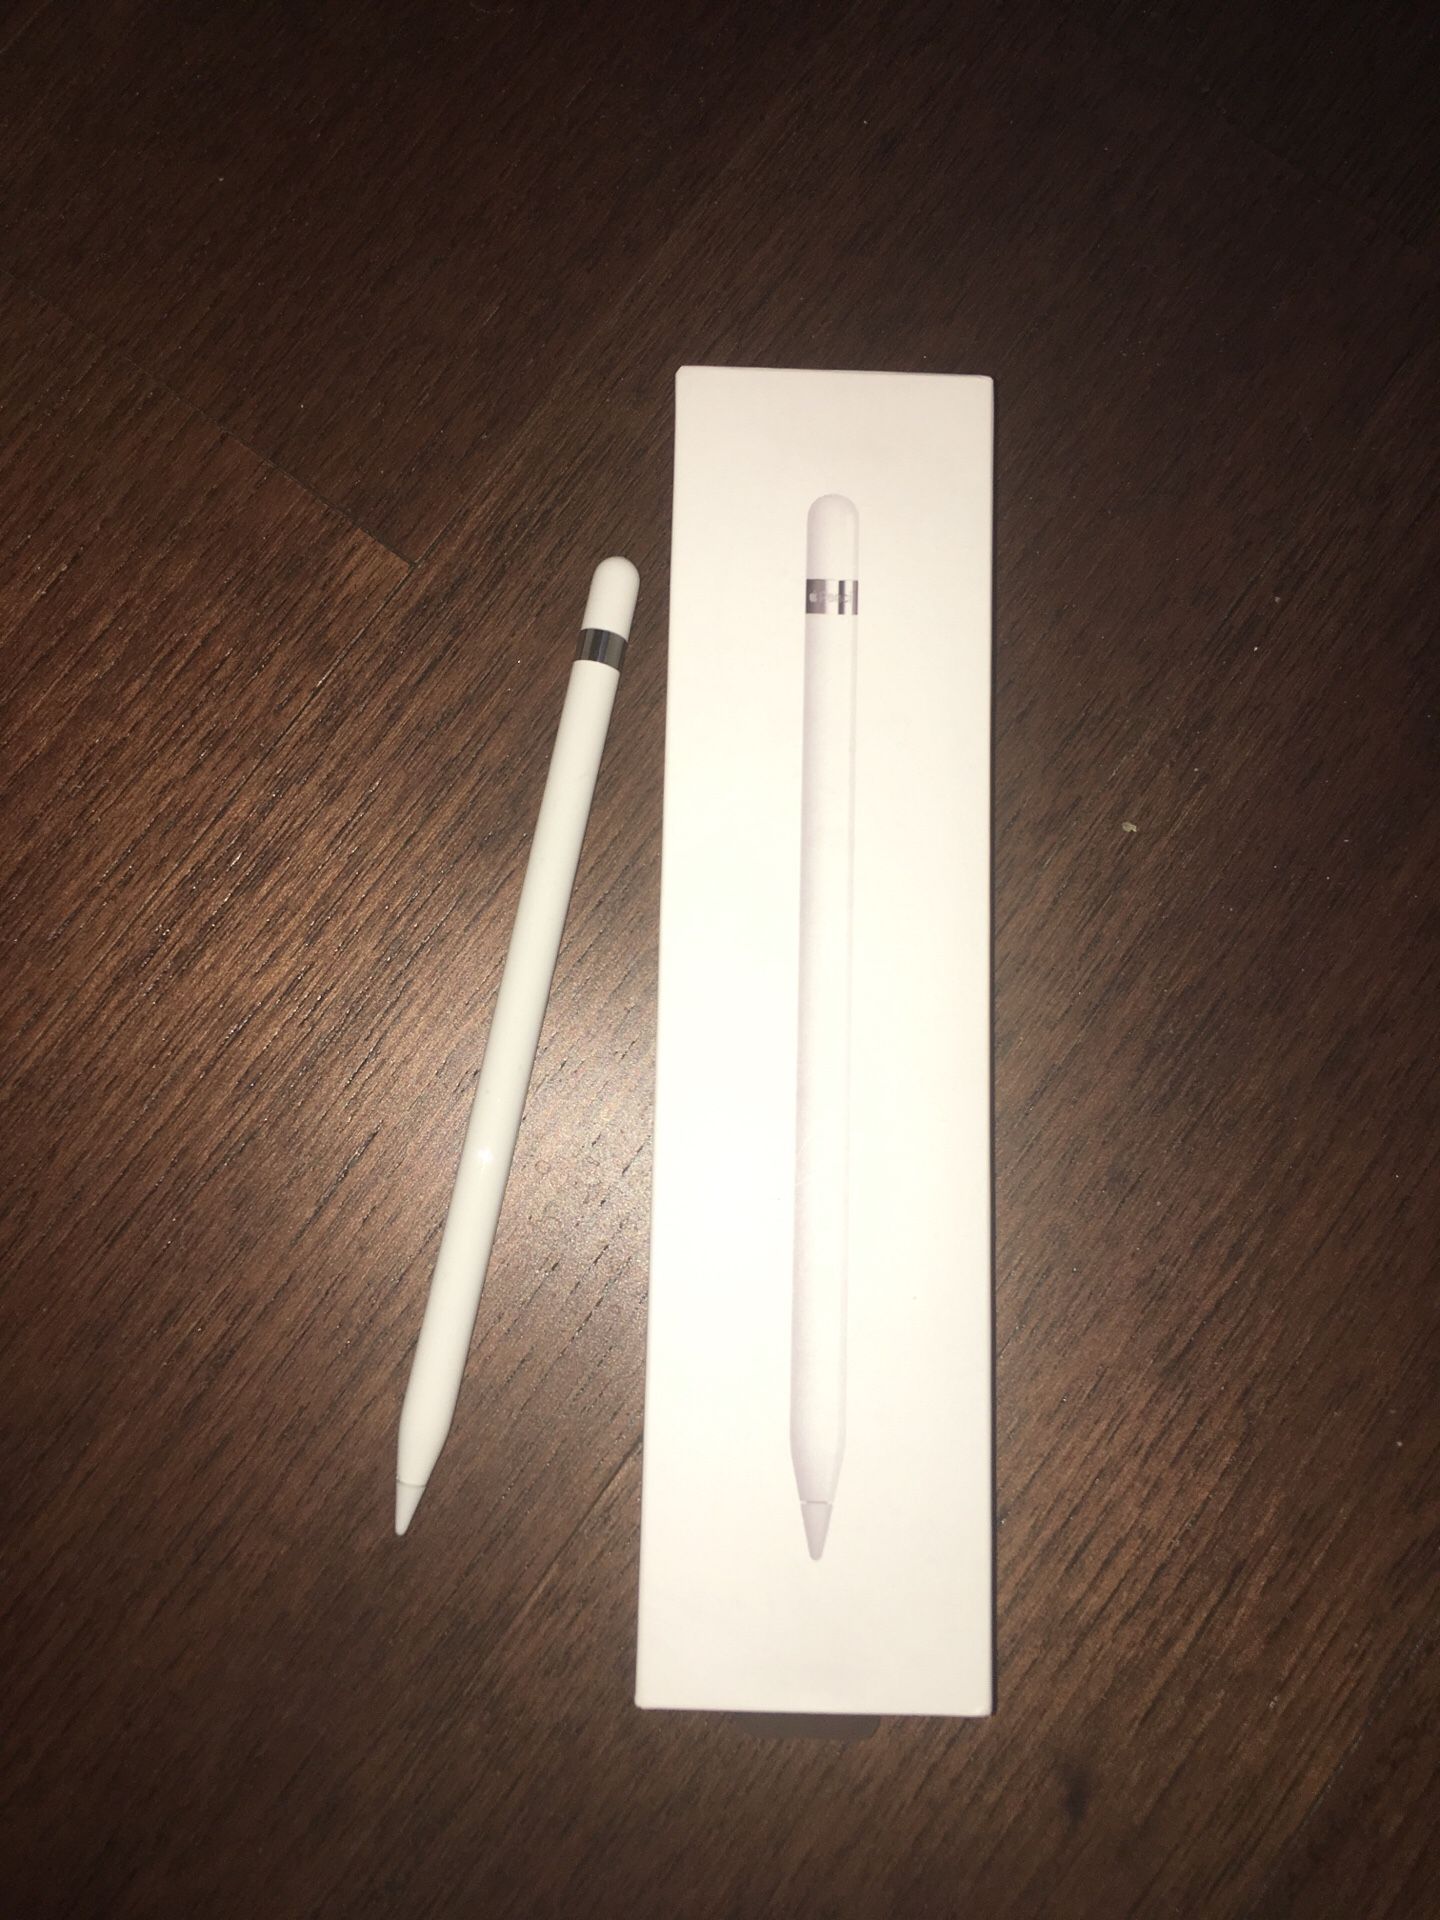 ✍🏻Like New! Apple iPad Pencil good working, no any Cracked or scratch✍🏻